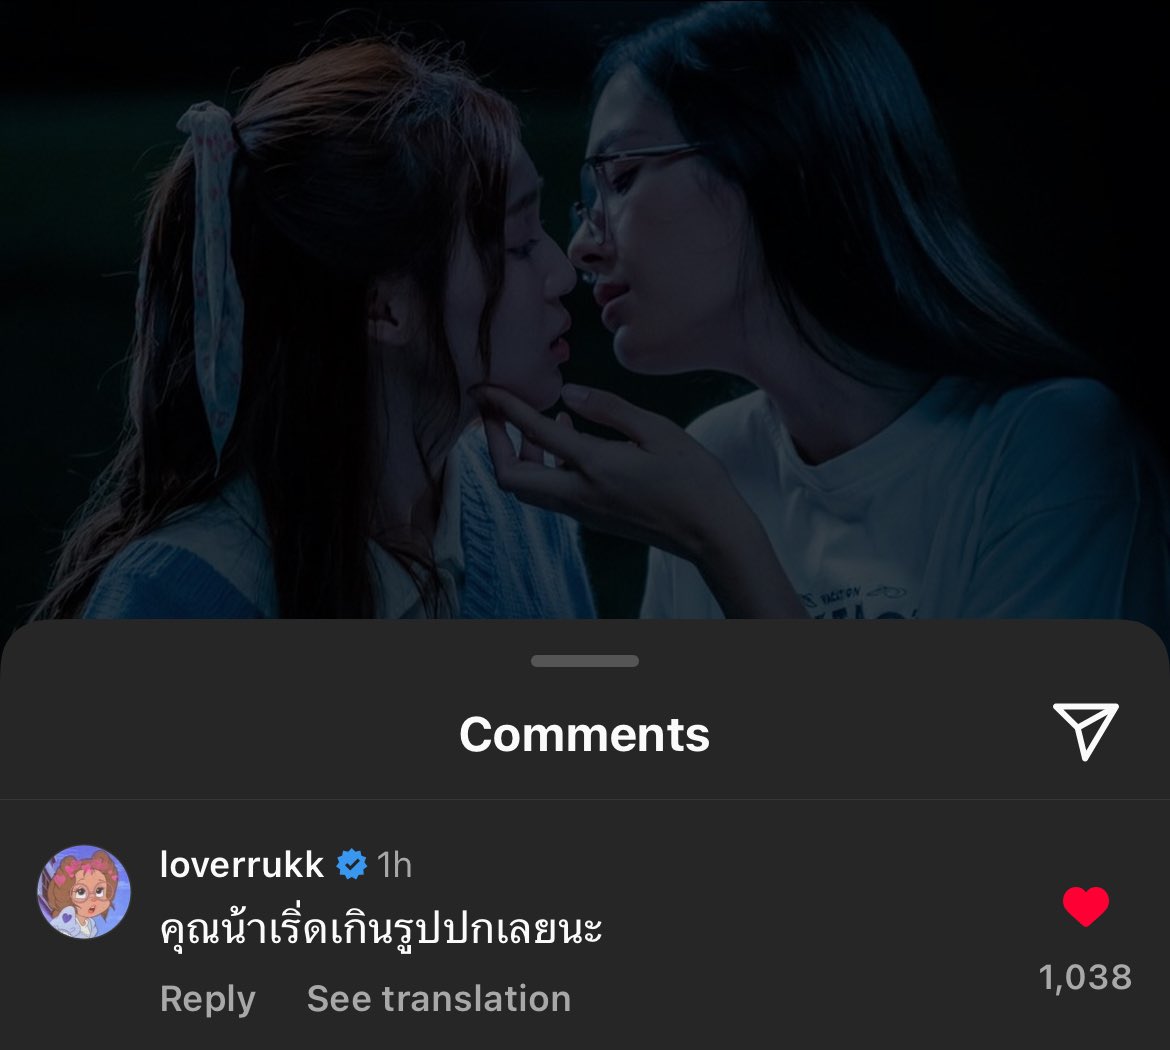 🩷: Ohhh too superb to select this pic as the cover photo.

Love teasing Milk about choosing this pic to be the 1st one on her post. And maybe Love’s too shy to share it, she chose the panda Ongsa pic when sharing on her ig story.🤣
#23point5EP8